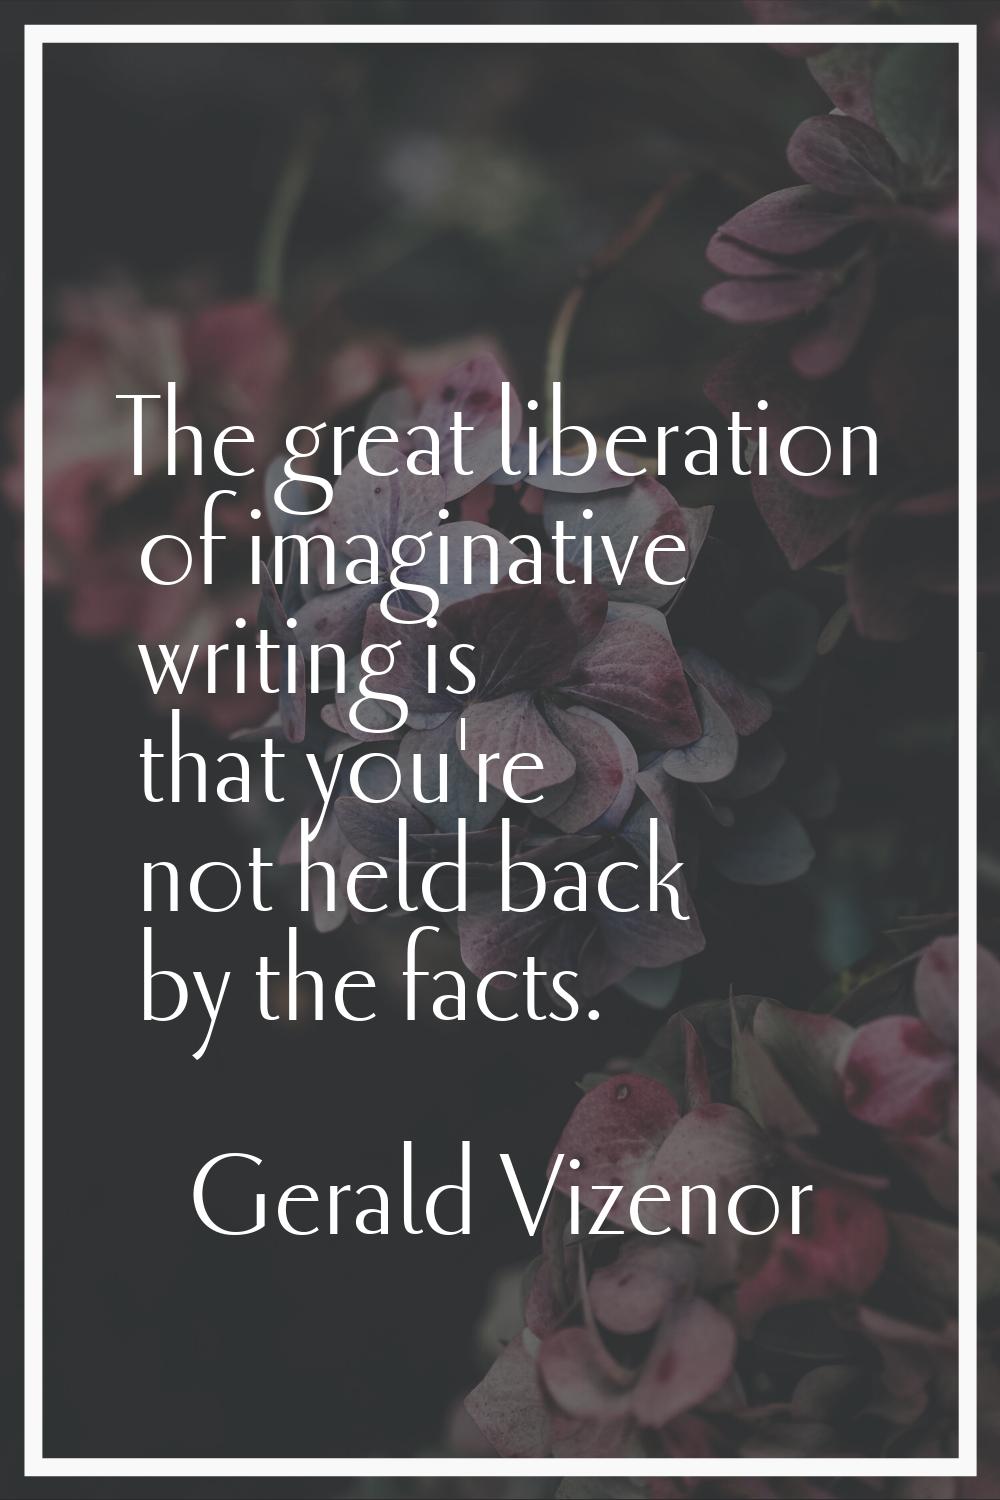 The great liberation of imaginative writing is that you're not held back by the facts.